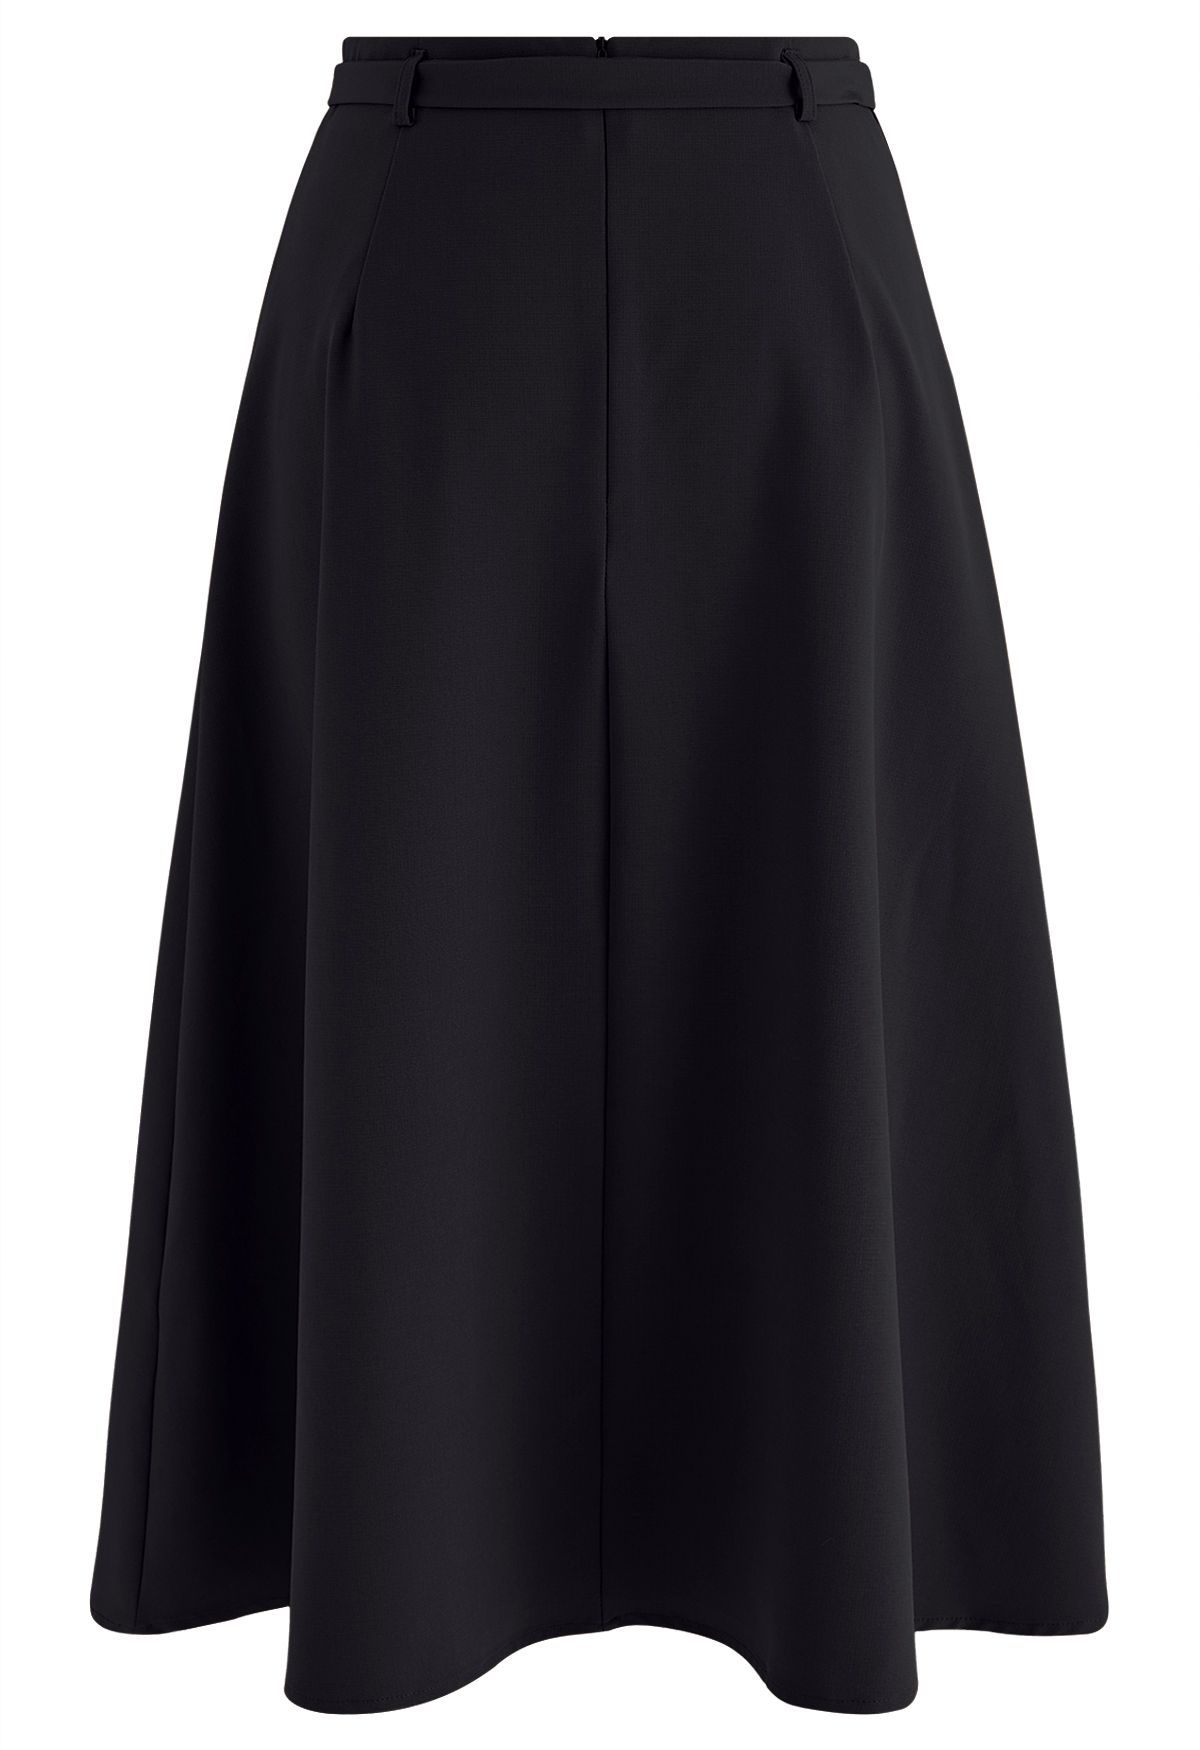 Belted Pleated A-Line Midi Skirt in Black - Retro, Indie and Unique Fashion